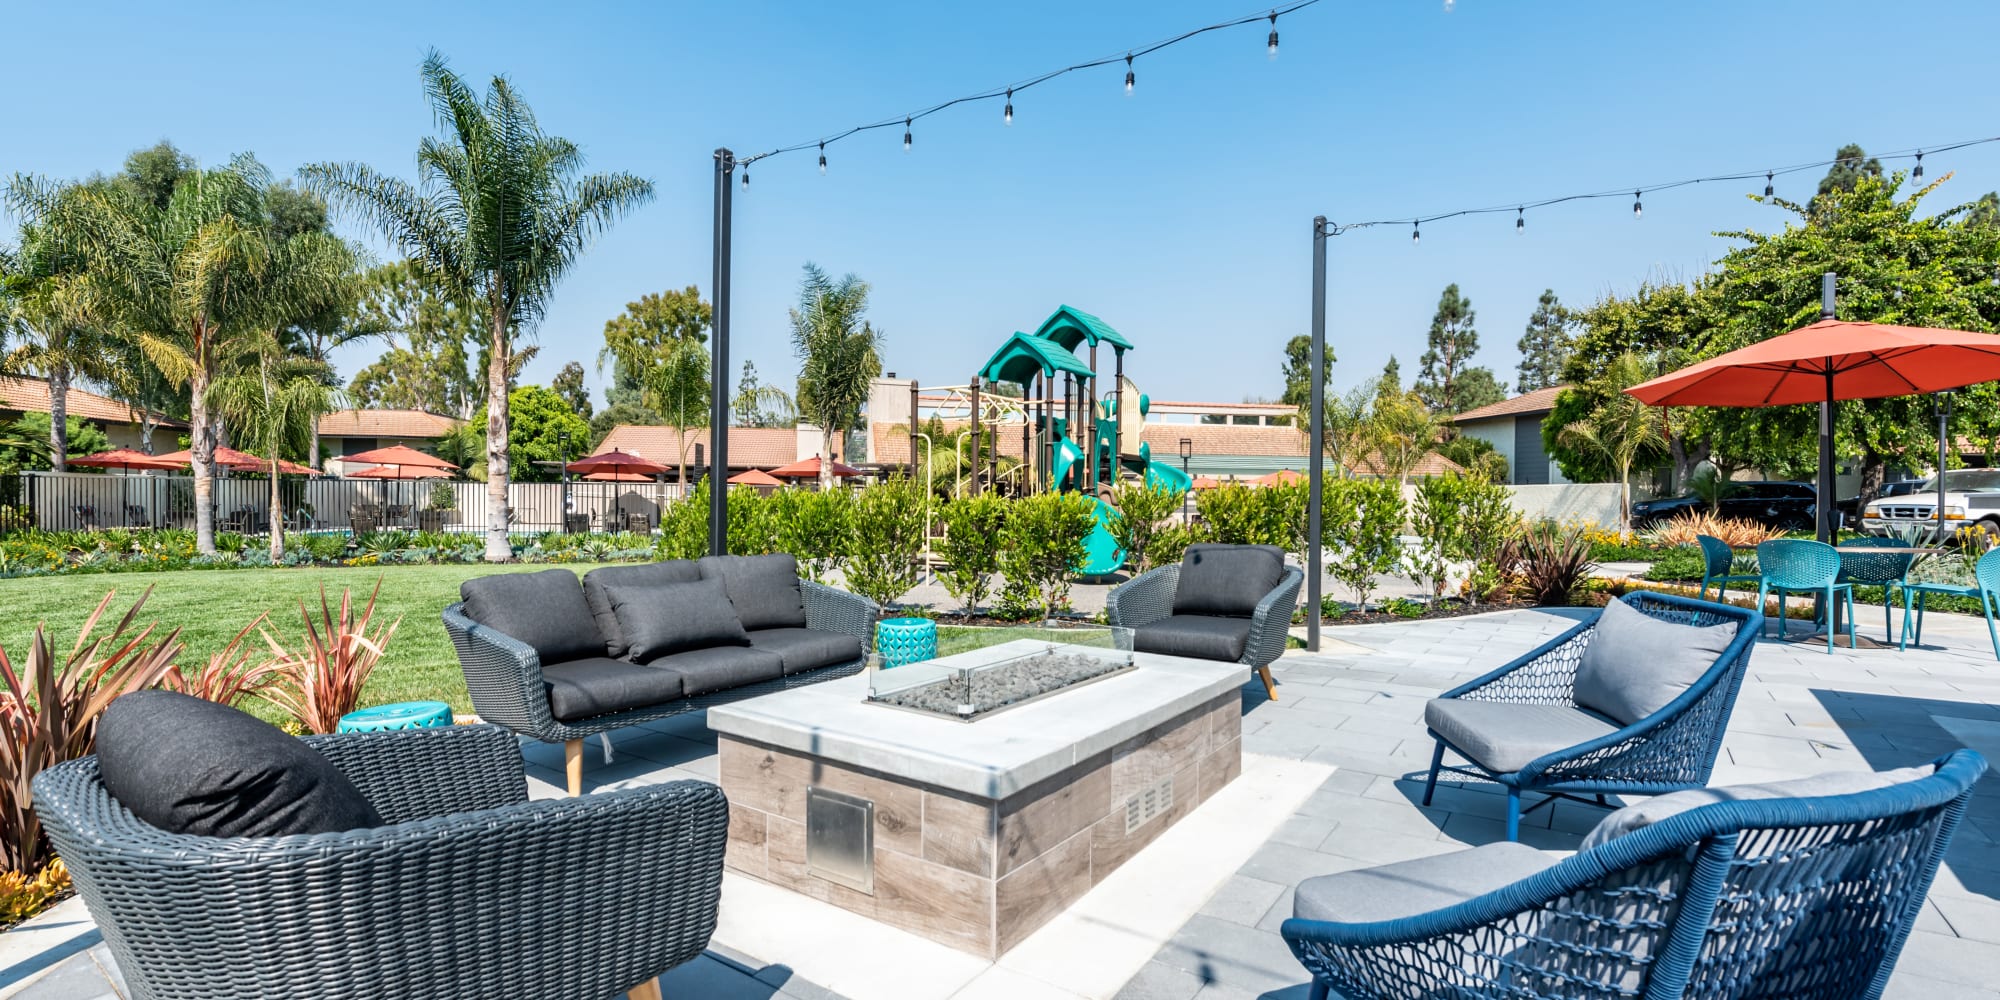 Cozy fire pit area, next to the large gated swimming pool and playground at Sofi Ventura in Ventura, California